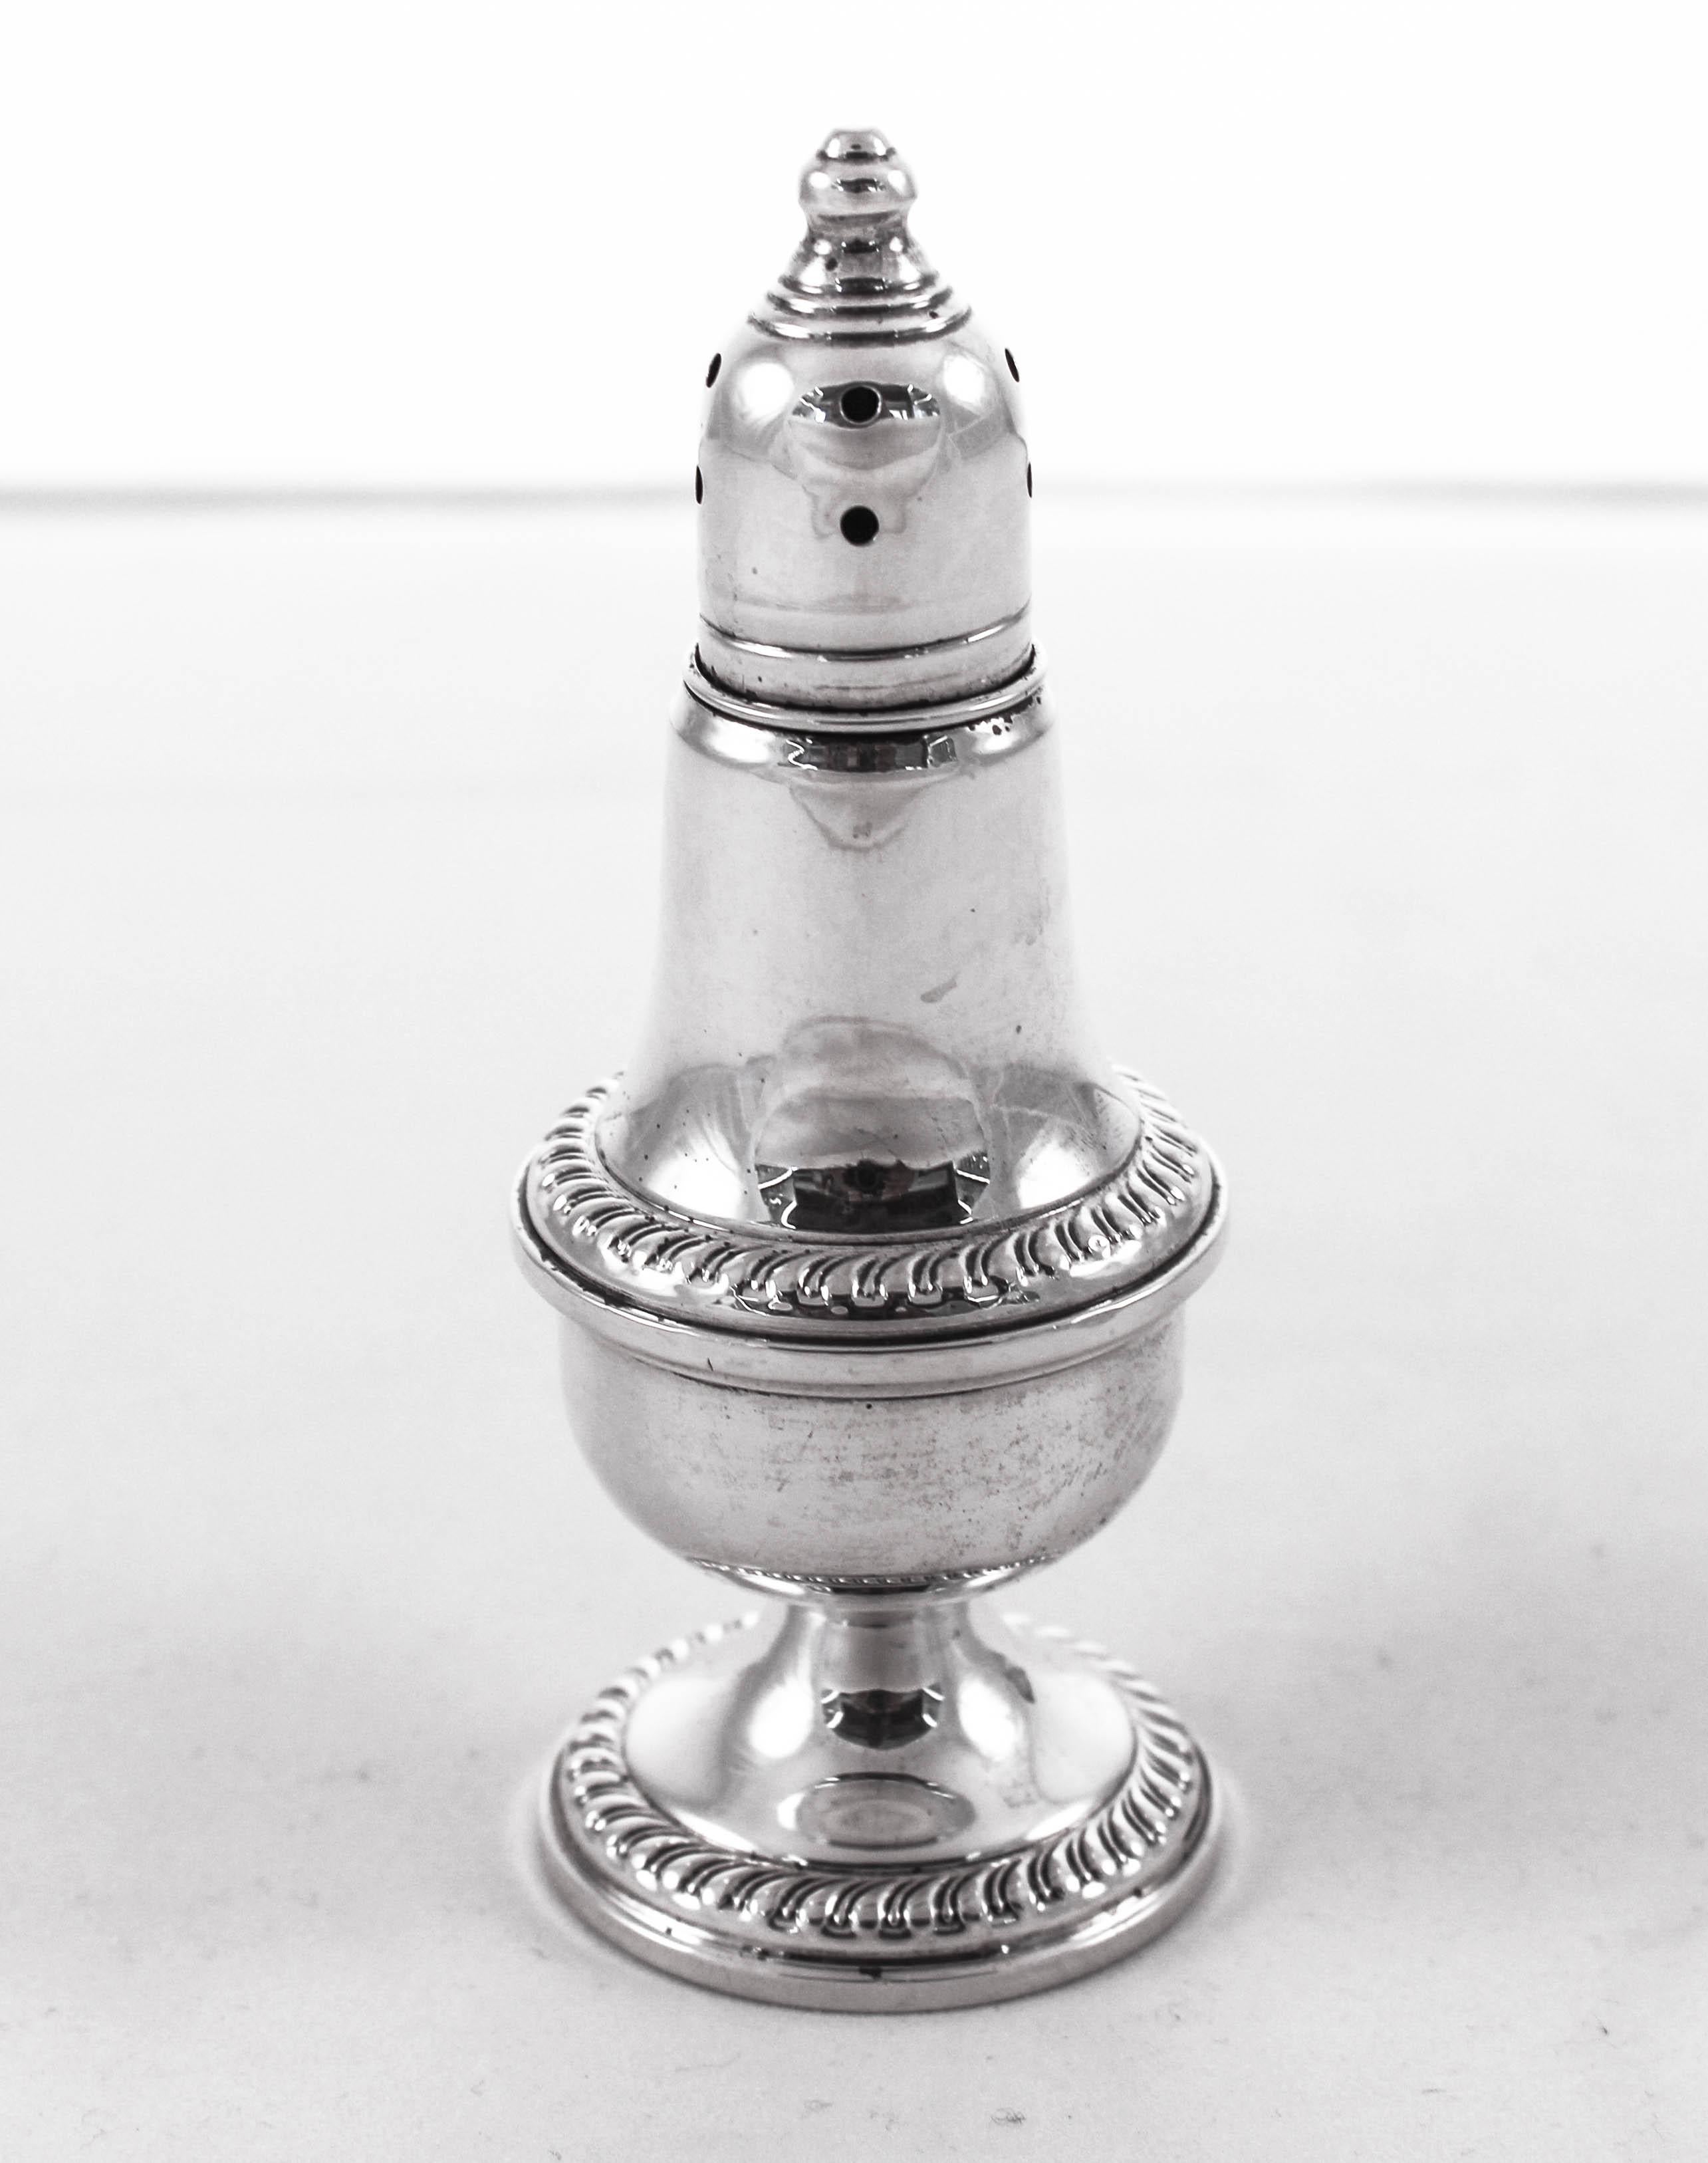 A pair of sterling silver salt and pepper shakers for sale. They have a decorative pattern around the base and mid-section. The tops unscrew for refill. They have a glass liner so you don’t need to empty them each week. The glass liners protect the